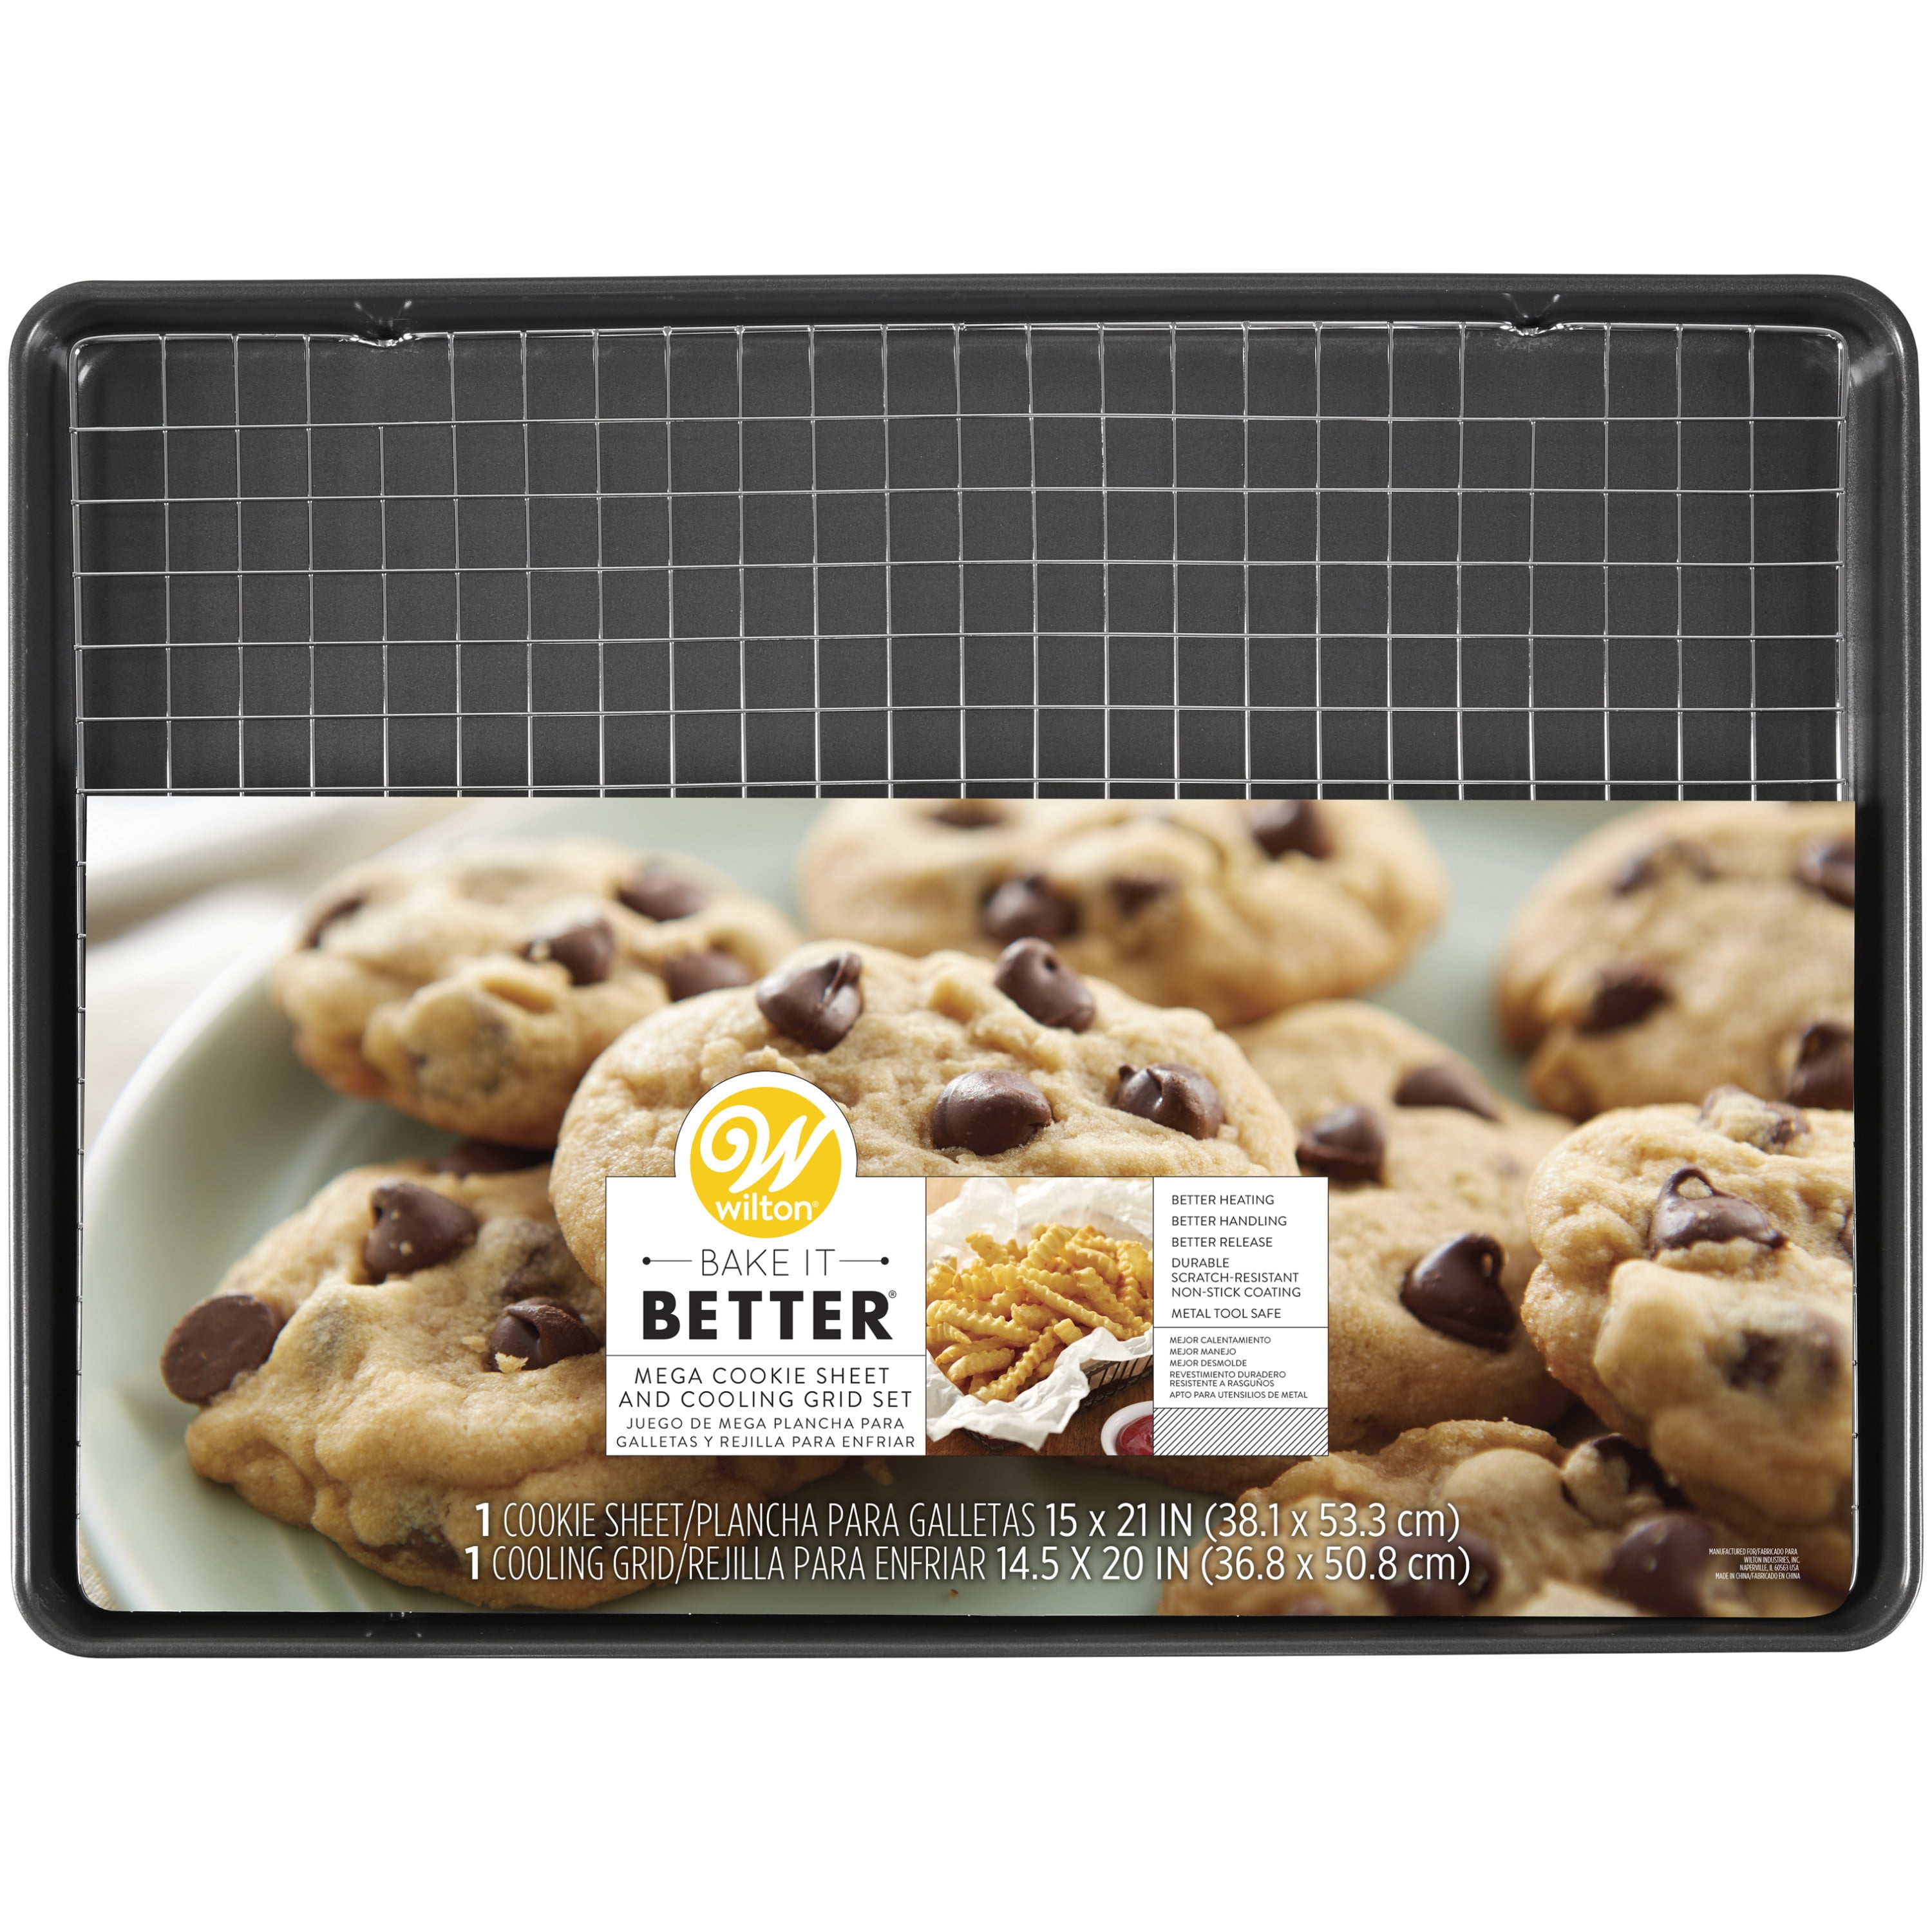 Wilton Ever-Glide Non-Stick Large Cookie Sheet, 17.25 x 11.5-Inch, Steel